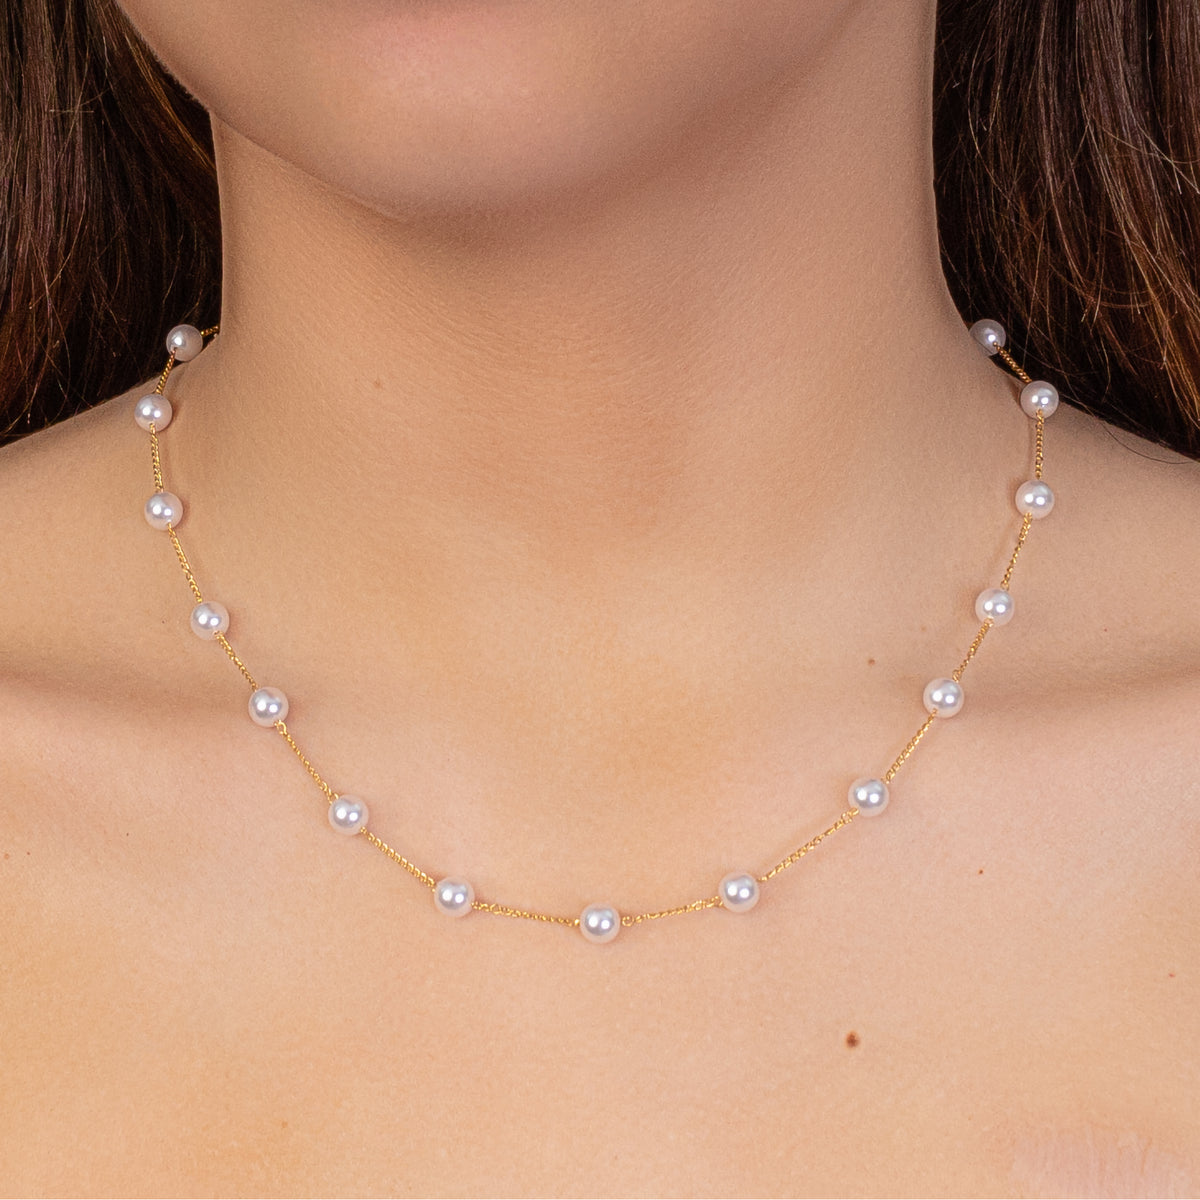 1119 - Dainty String of Pearls Choker - Pearl - Fashion Jewelry Wholesale